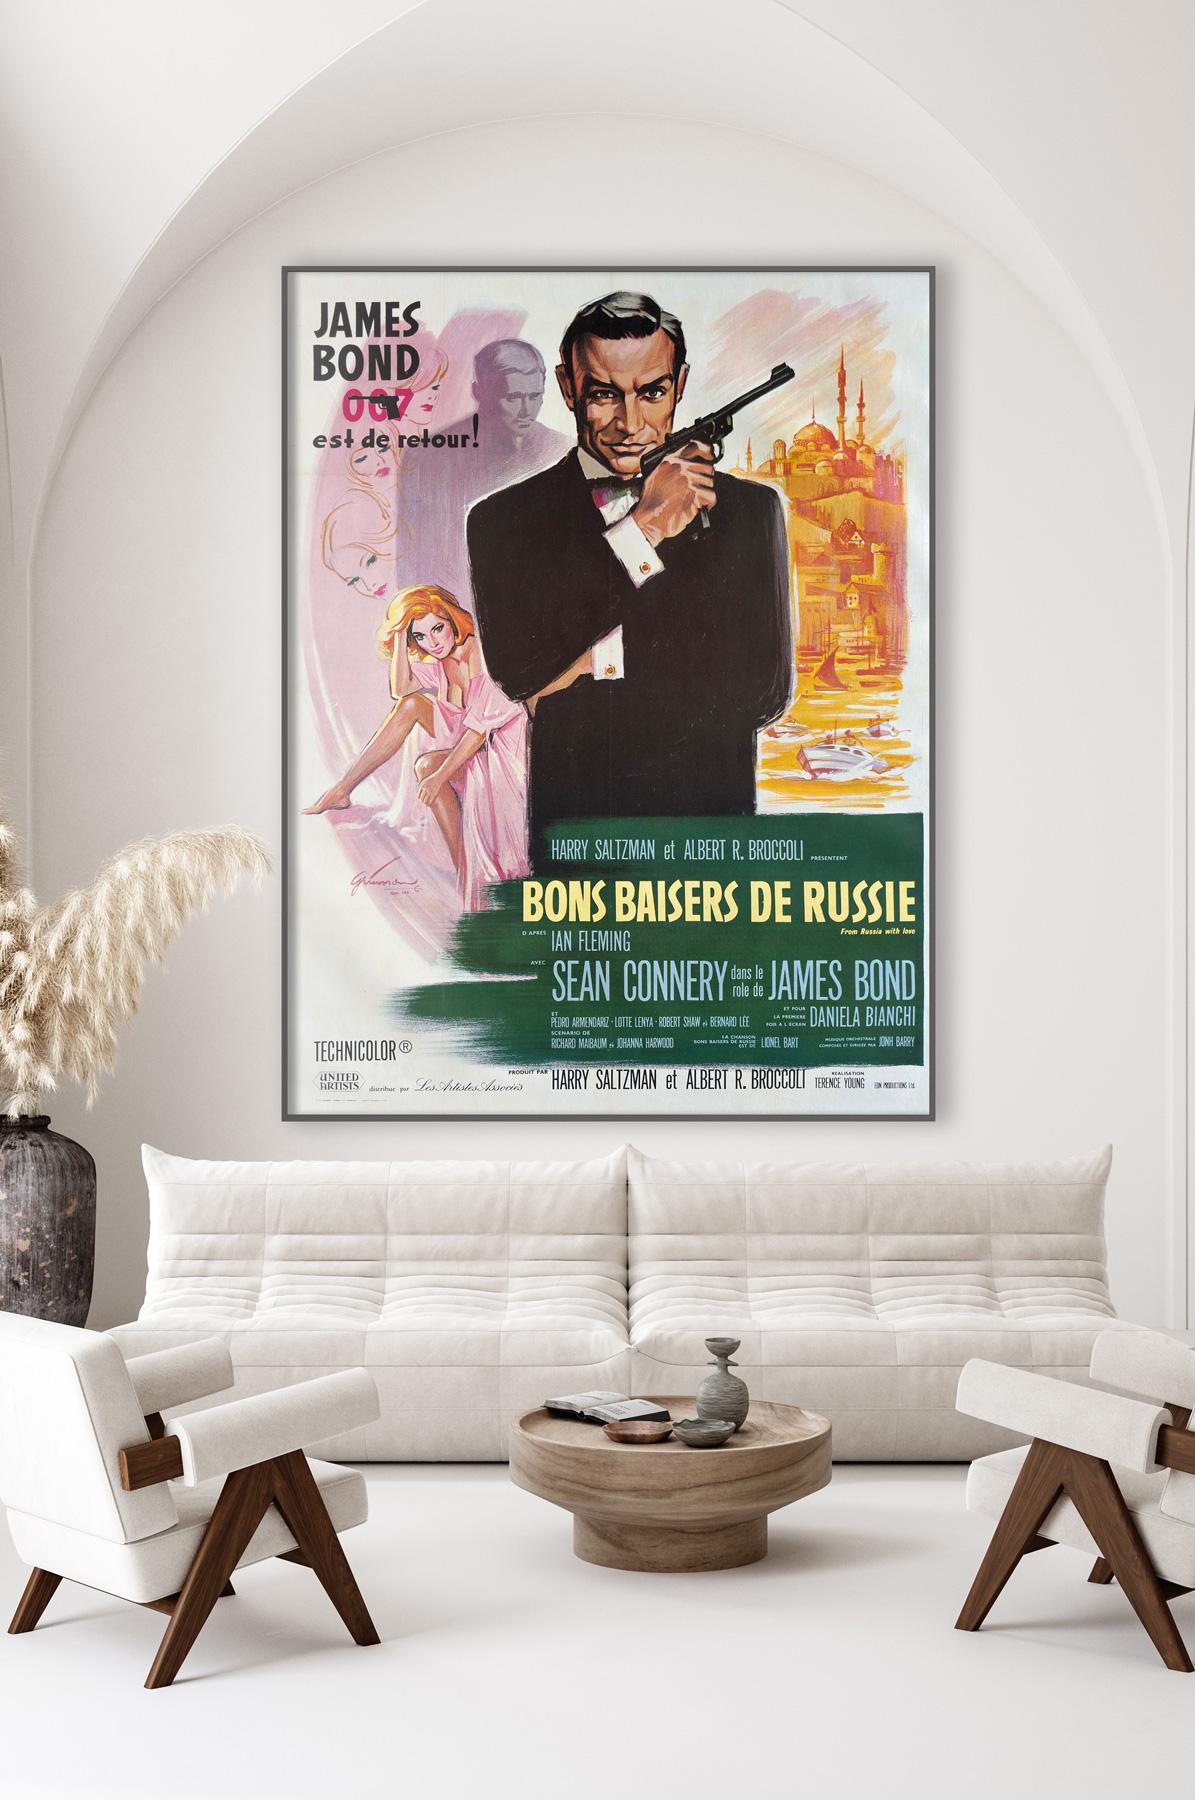 We love Boris Grinsson's design and colours on the French Grande film poster for From Russia With Love.  This early re-release from the 1970s is in fantastic condition.

In Sean Connery’s second outing as Bond, James Bond he willingly falls into an